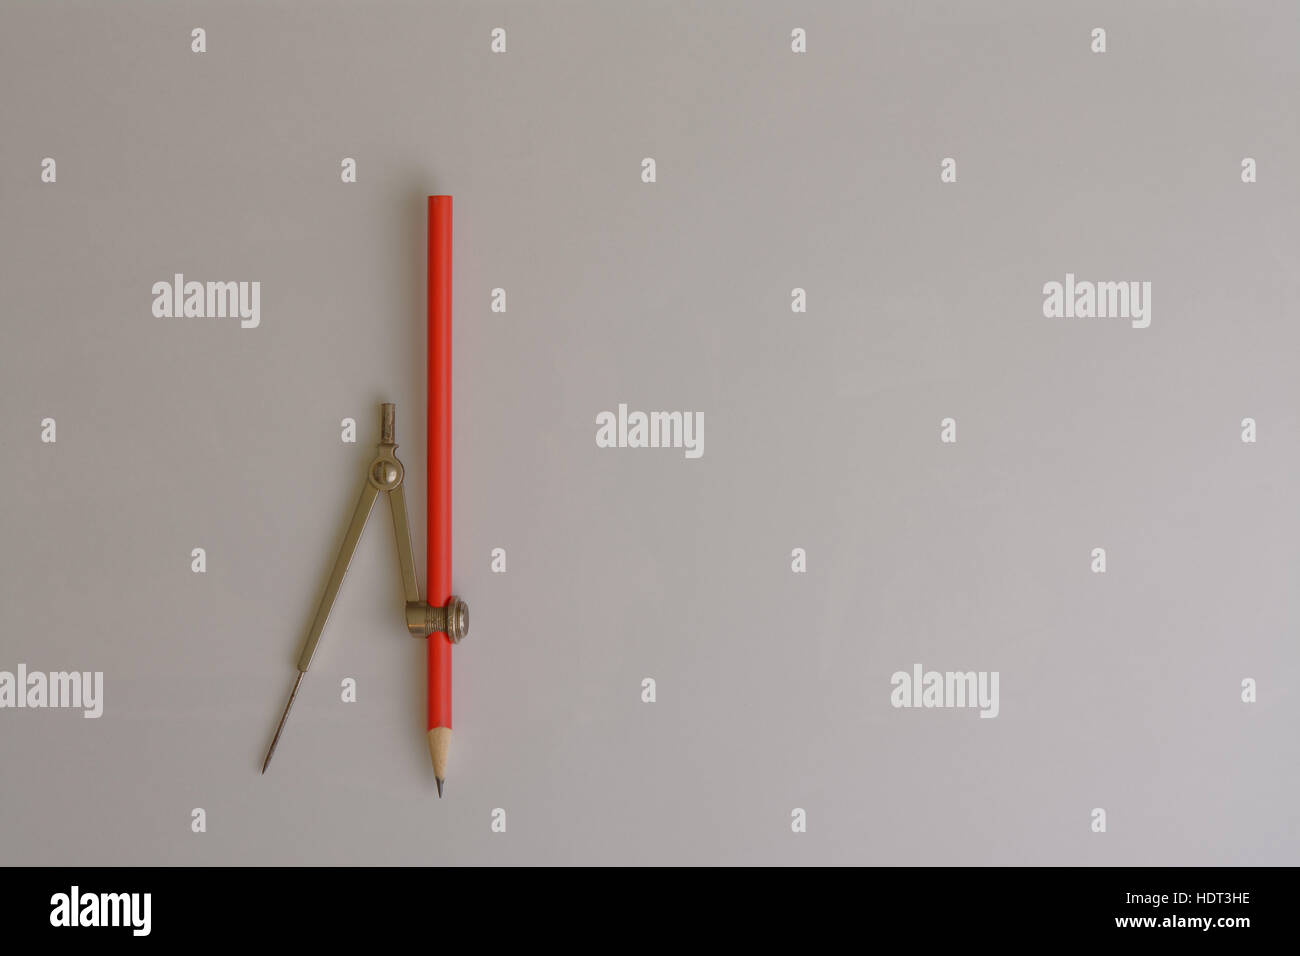 A standard drawing compass fitted with a red pencil on a blank background. Stock Photo